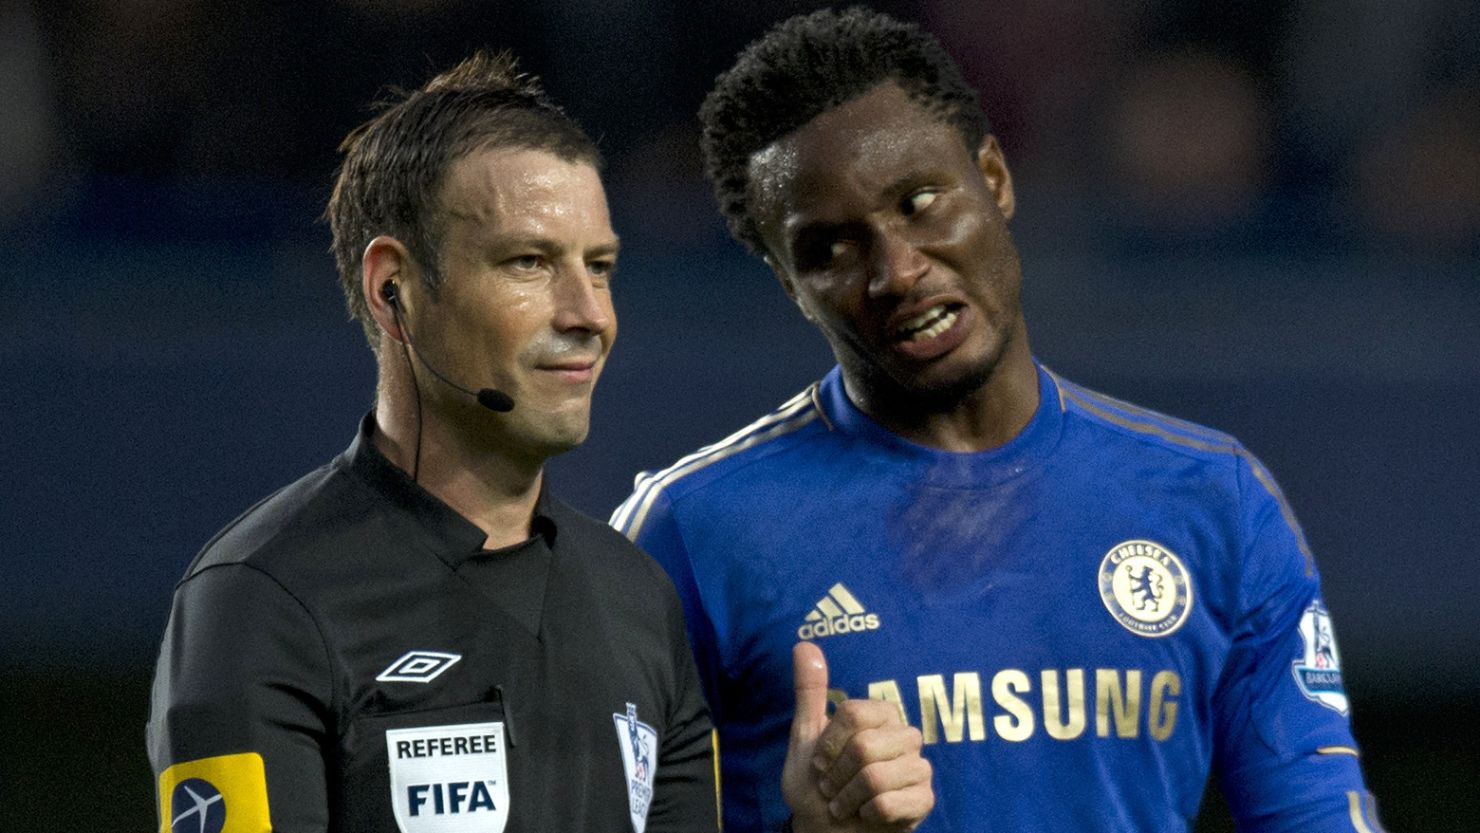 Chelsea's midfielder John Obi Mikel talks with referee Mark Clattenburg during the Premier League clash with Manchester United